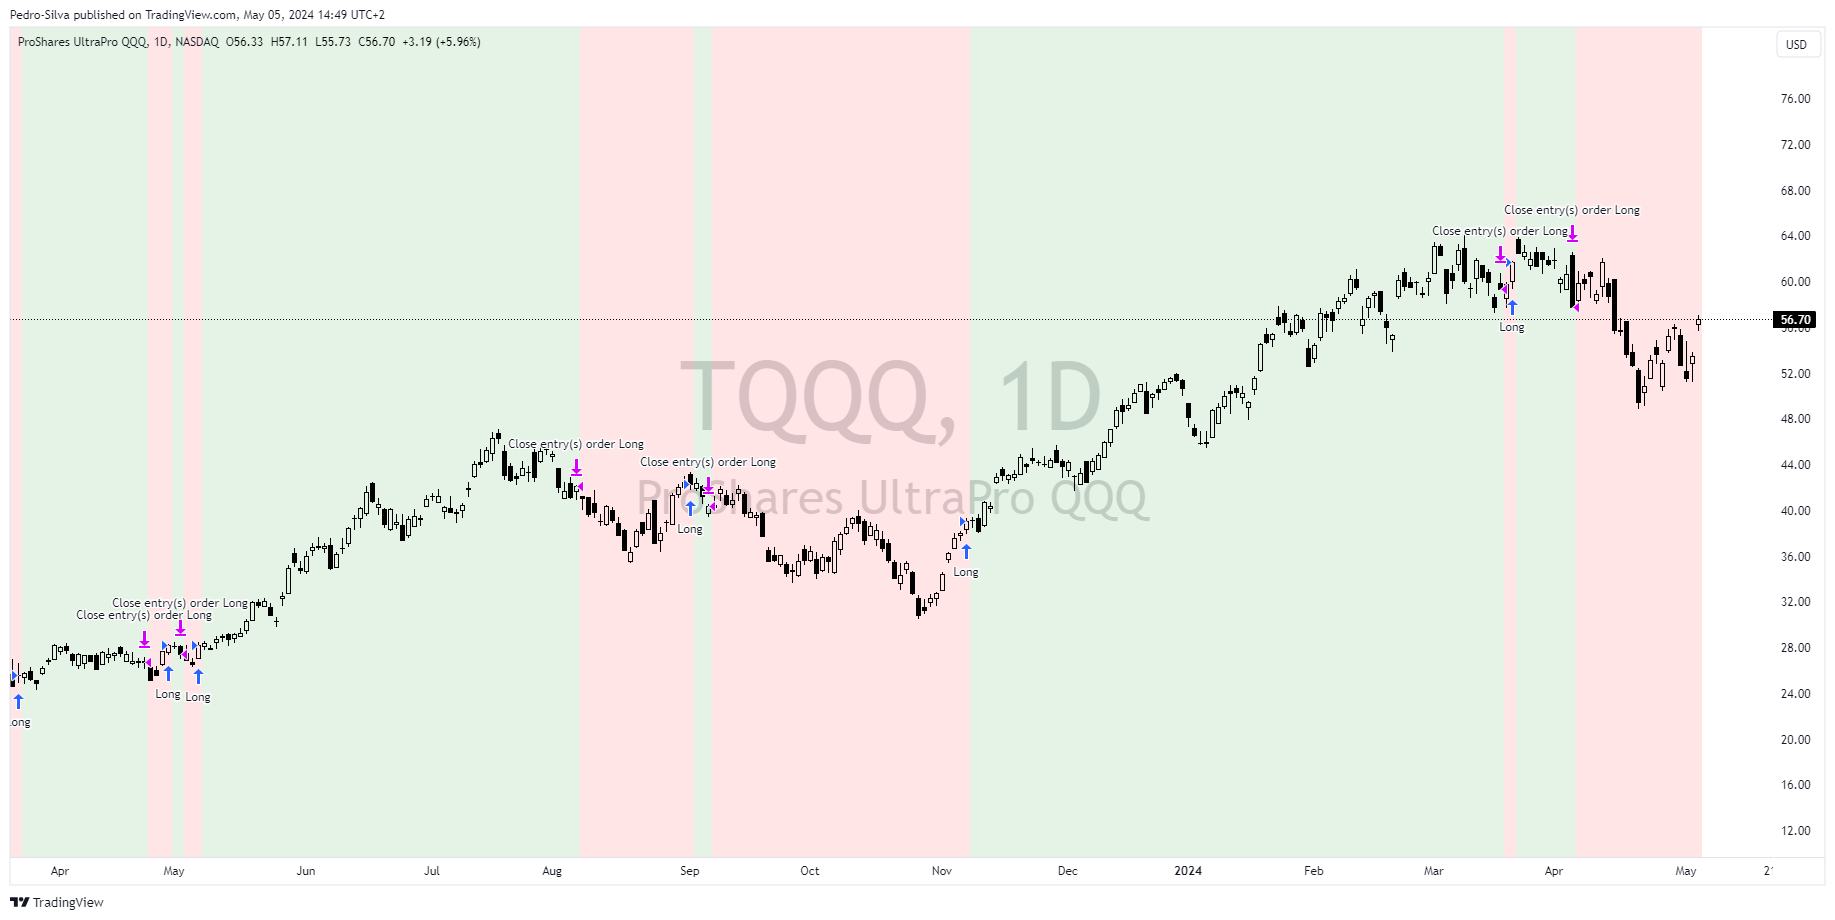 Chart of TQQQ ETF showing that Alpha Signals strategy continues on a red signal.